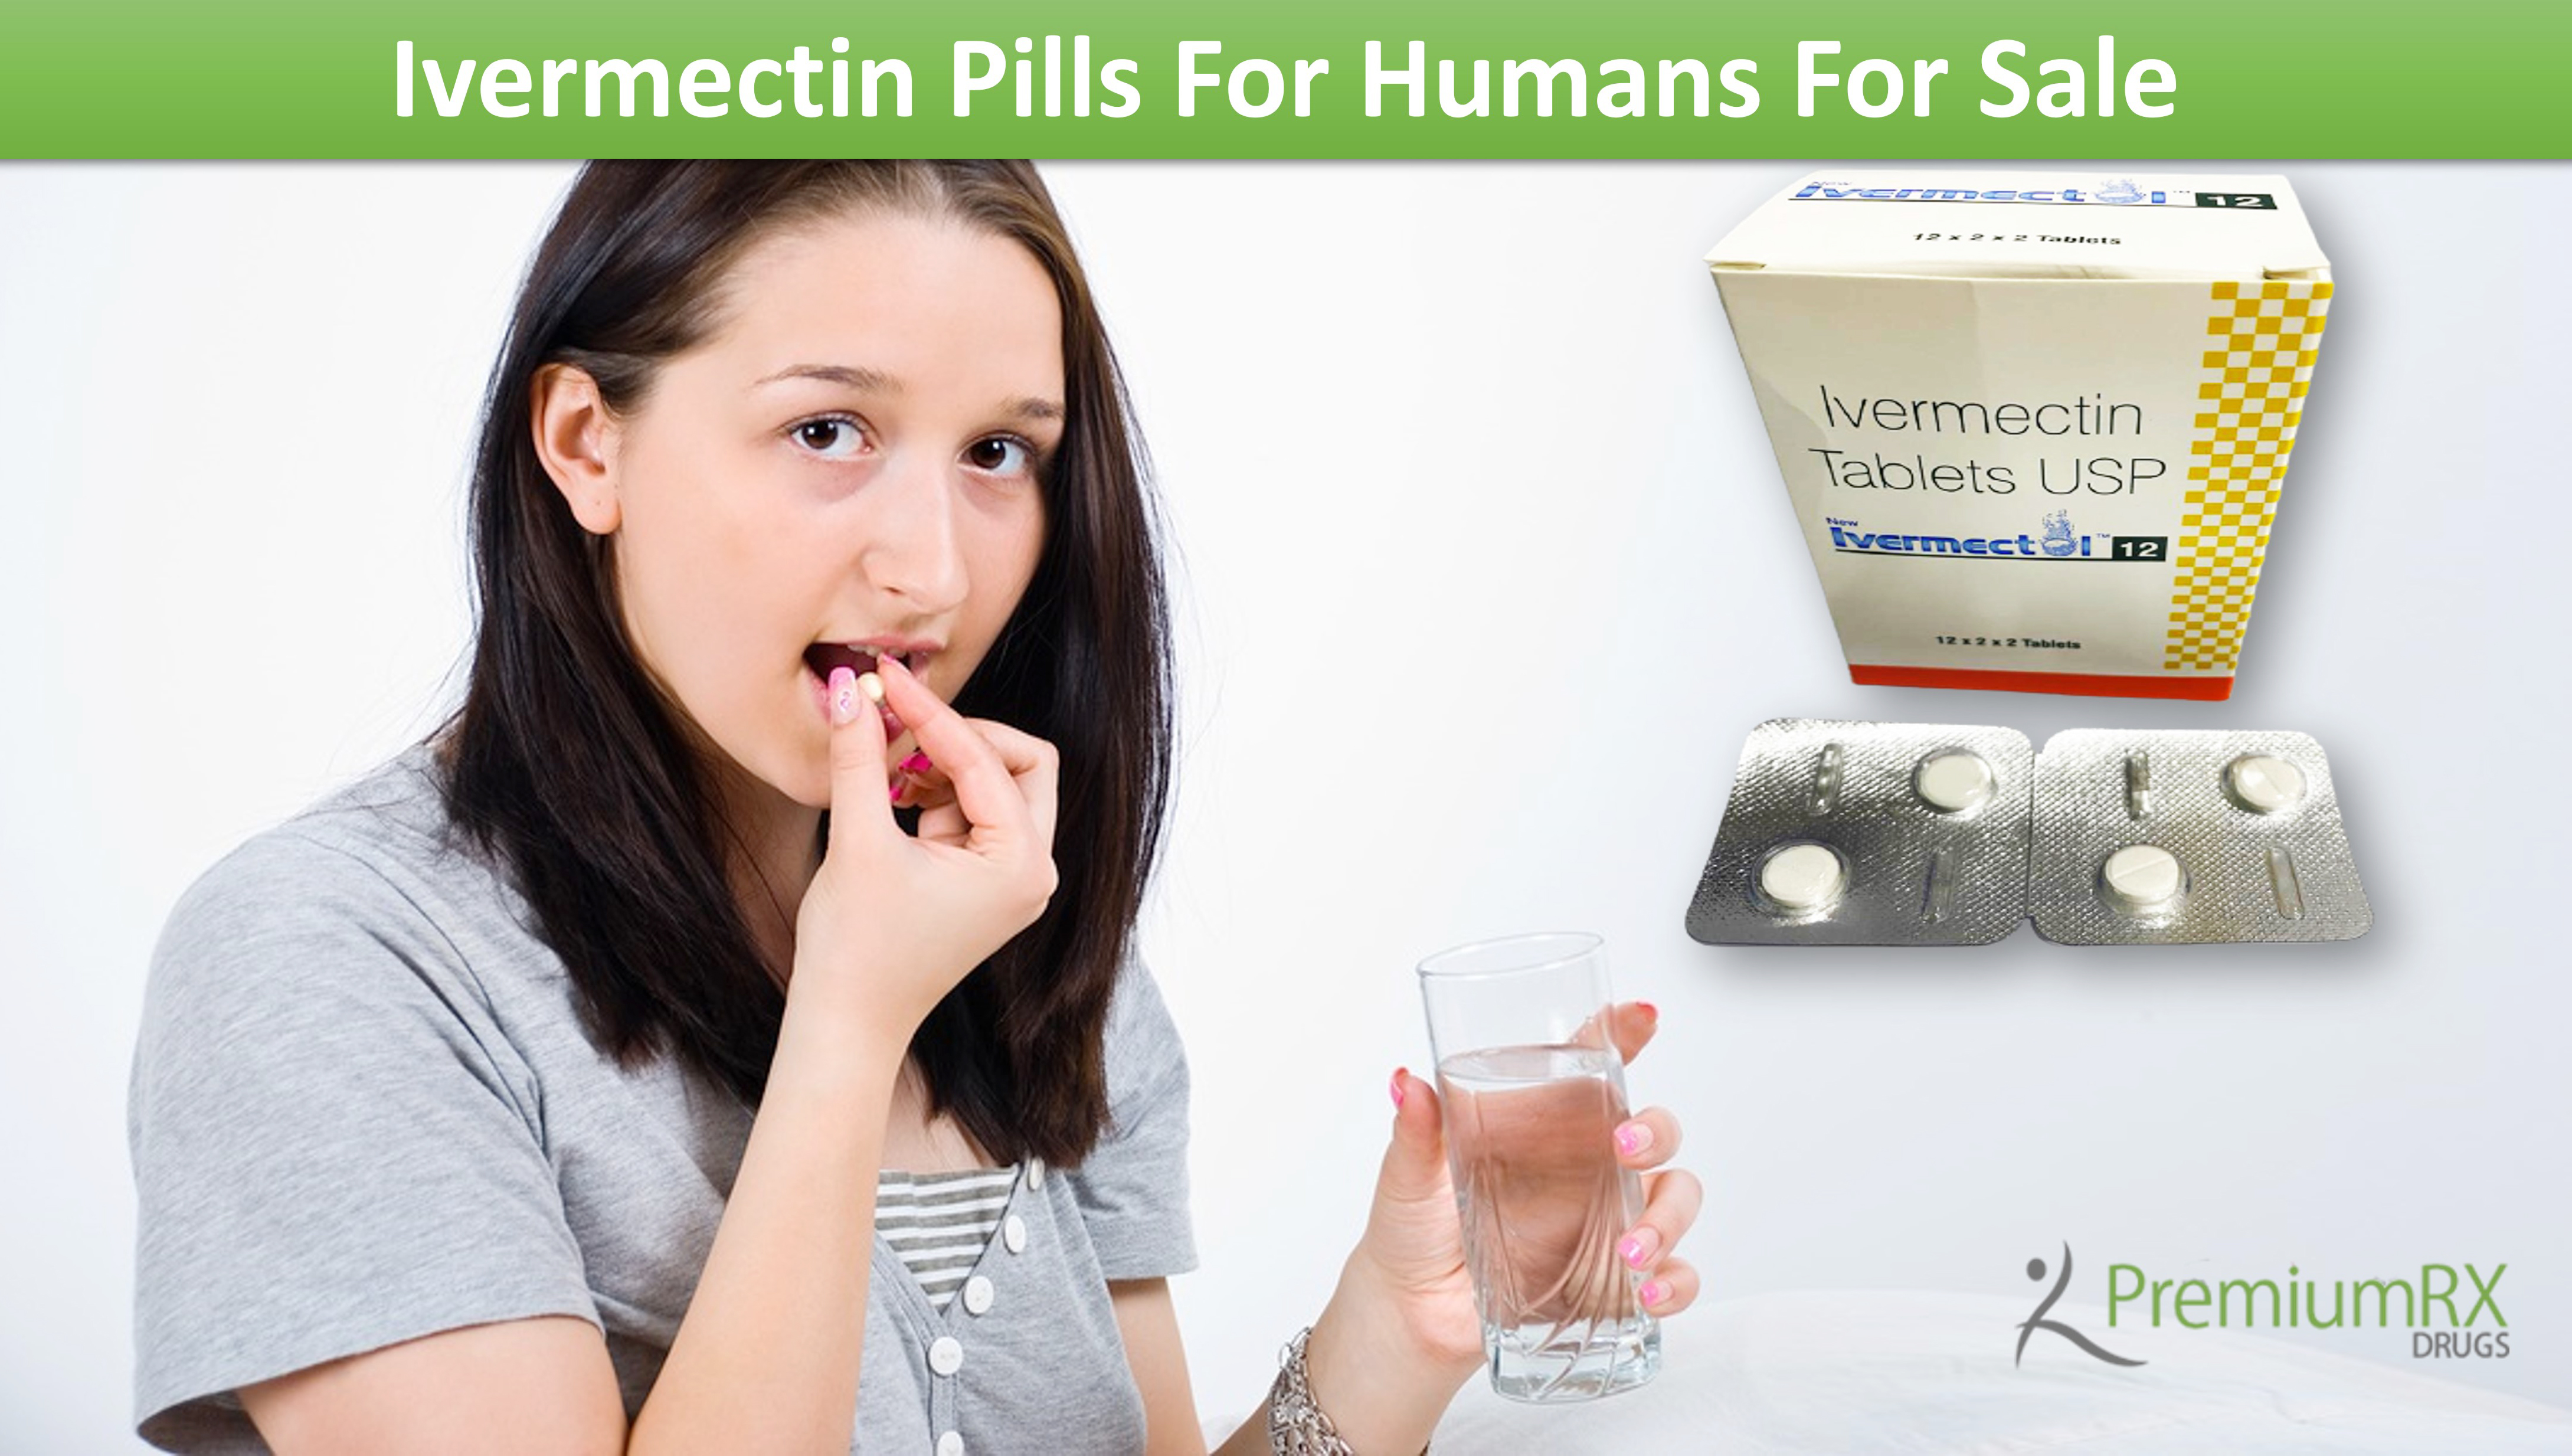 Ivermectin Pills For Humans For Sale